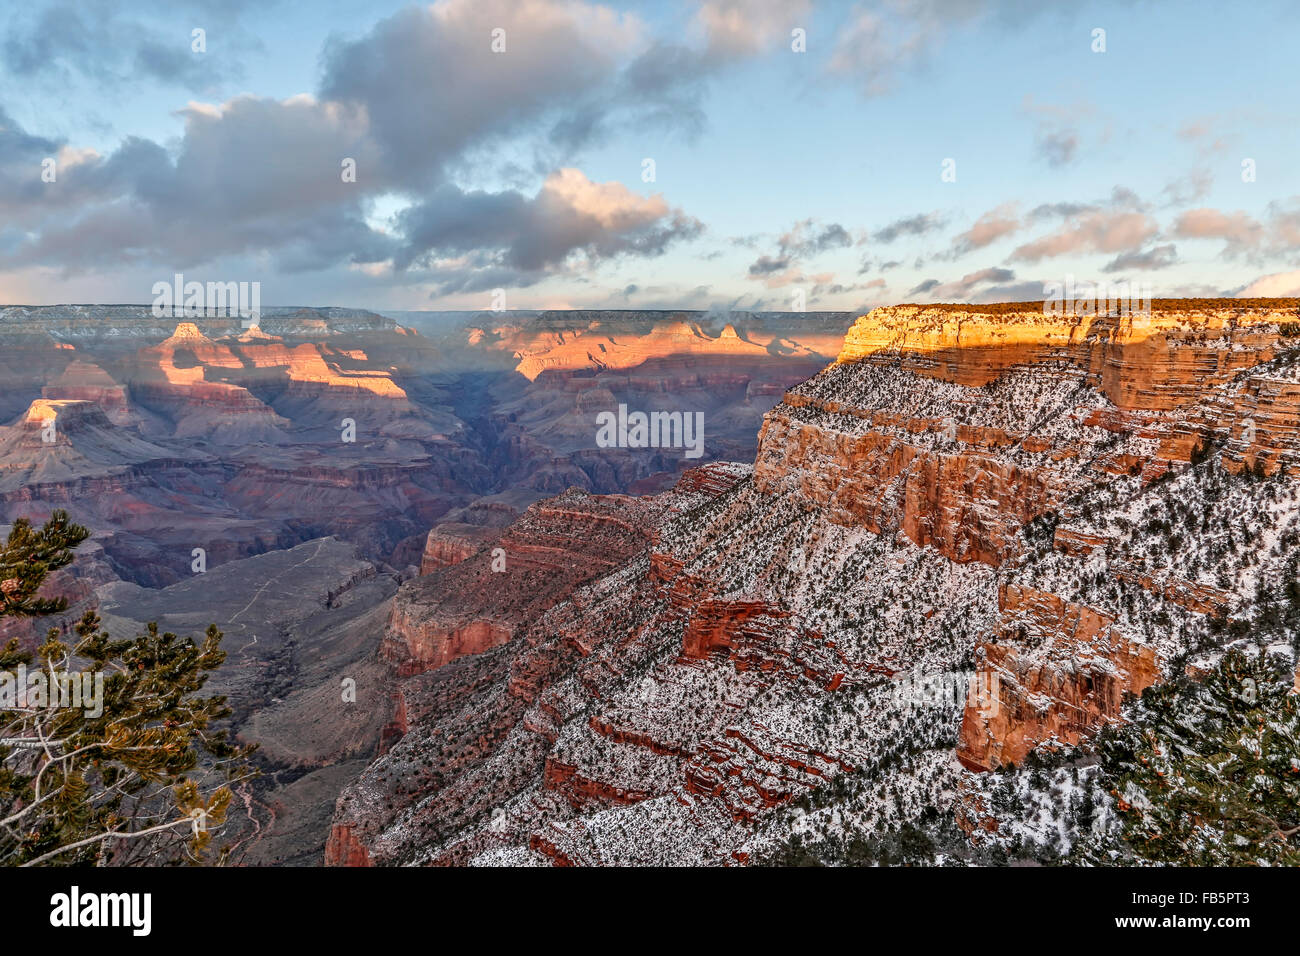 Snow-covered bluffs and canyons, from Rim Trail at the Village, Grand Canyon National Park, Arizona USA Stock Photo